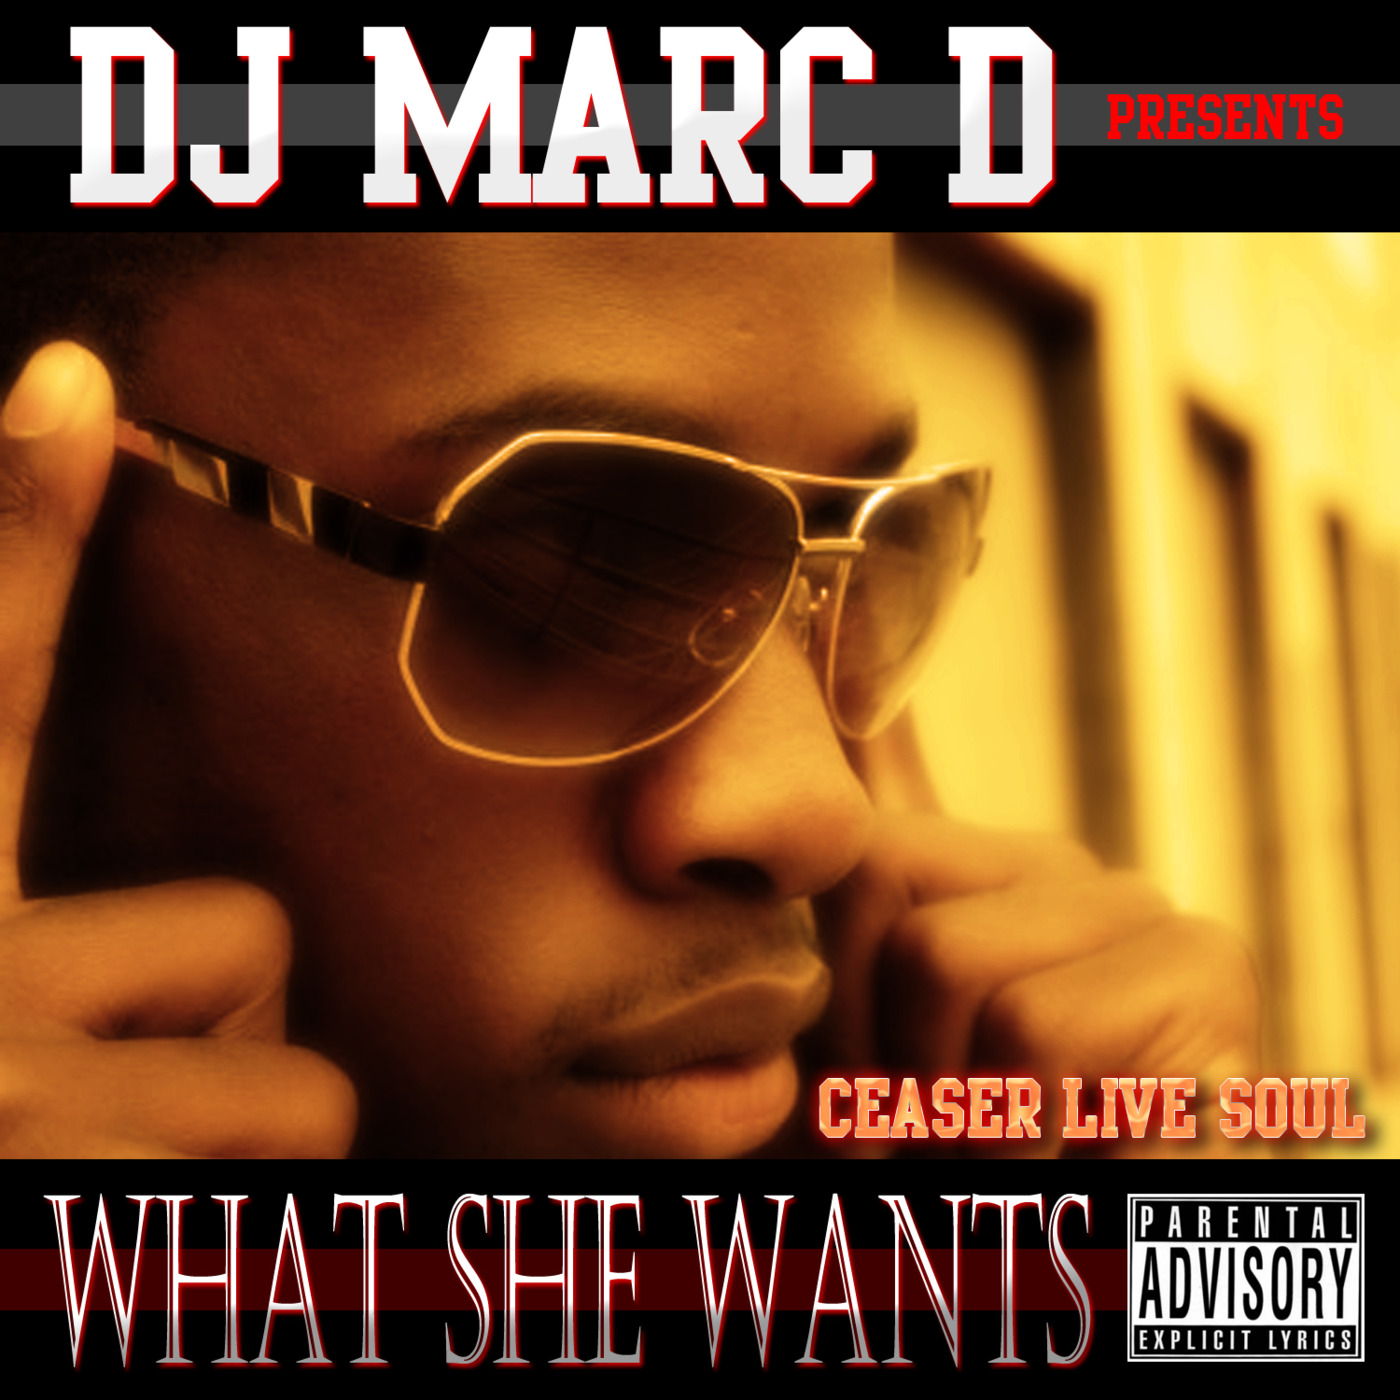 @Djmarcd #RNB #Mixtapes #Downloads - Ft. Ceaser Live Soul - What She Wants available #Itunes #Amazon #Googleplay 6 10 14